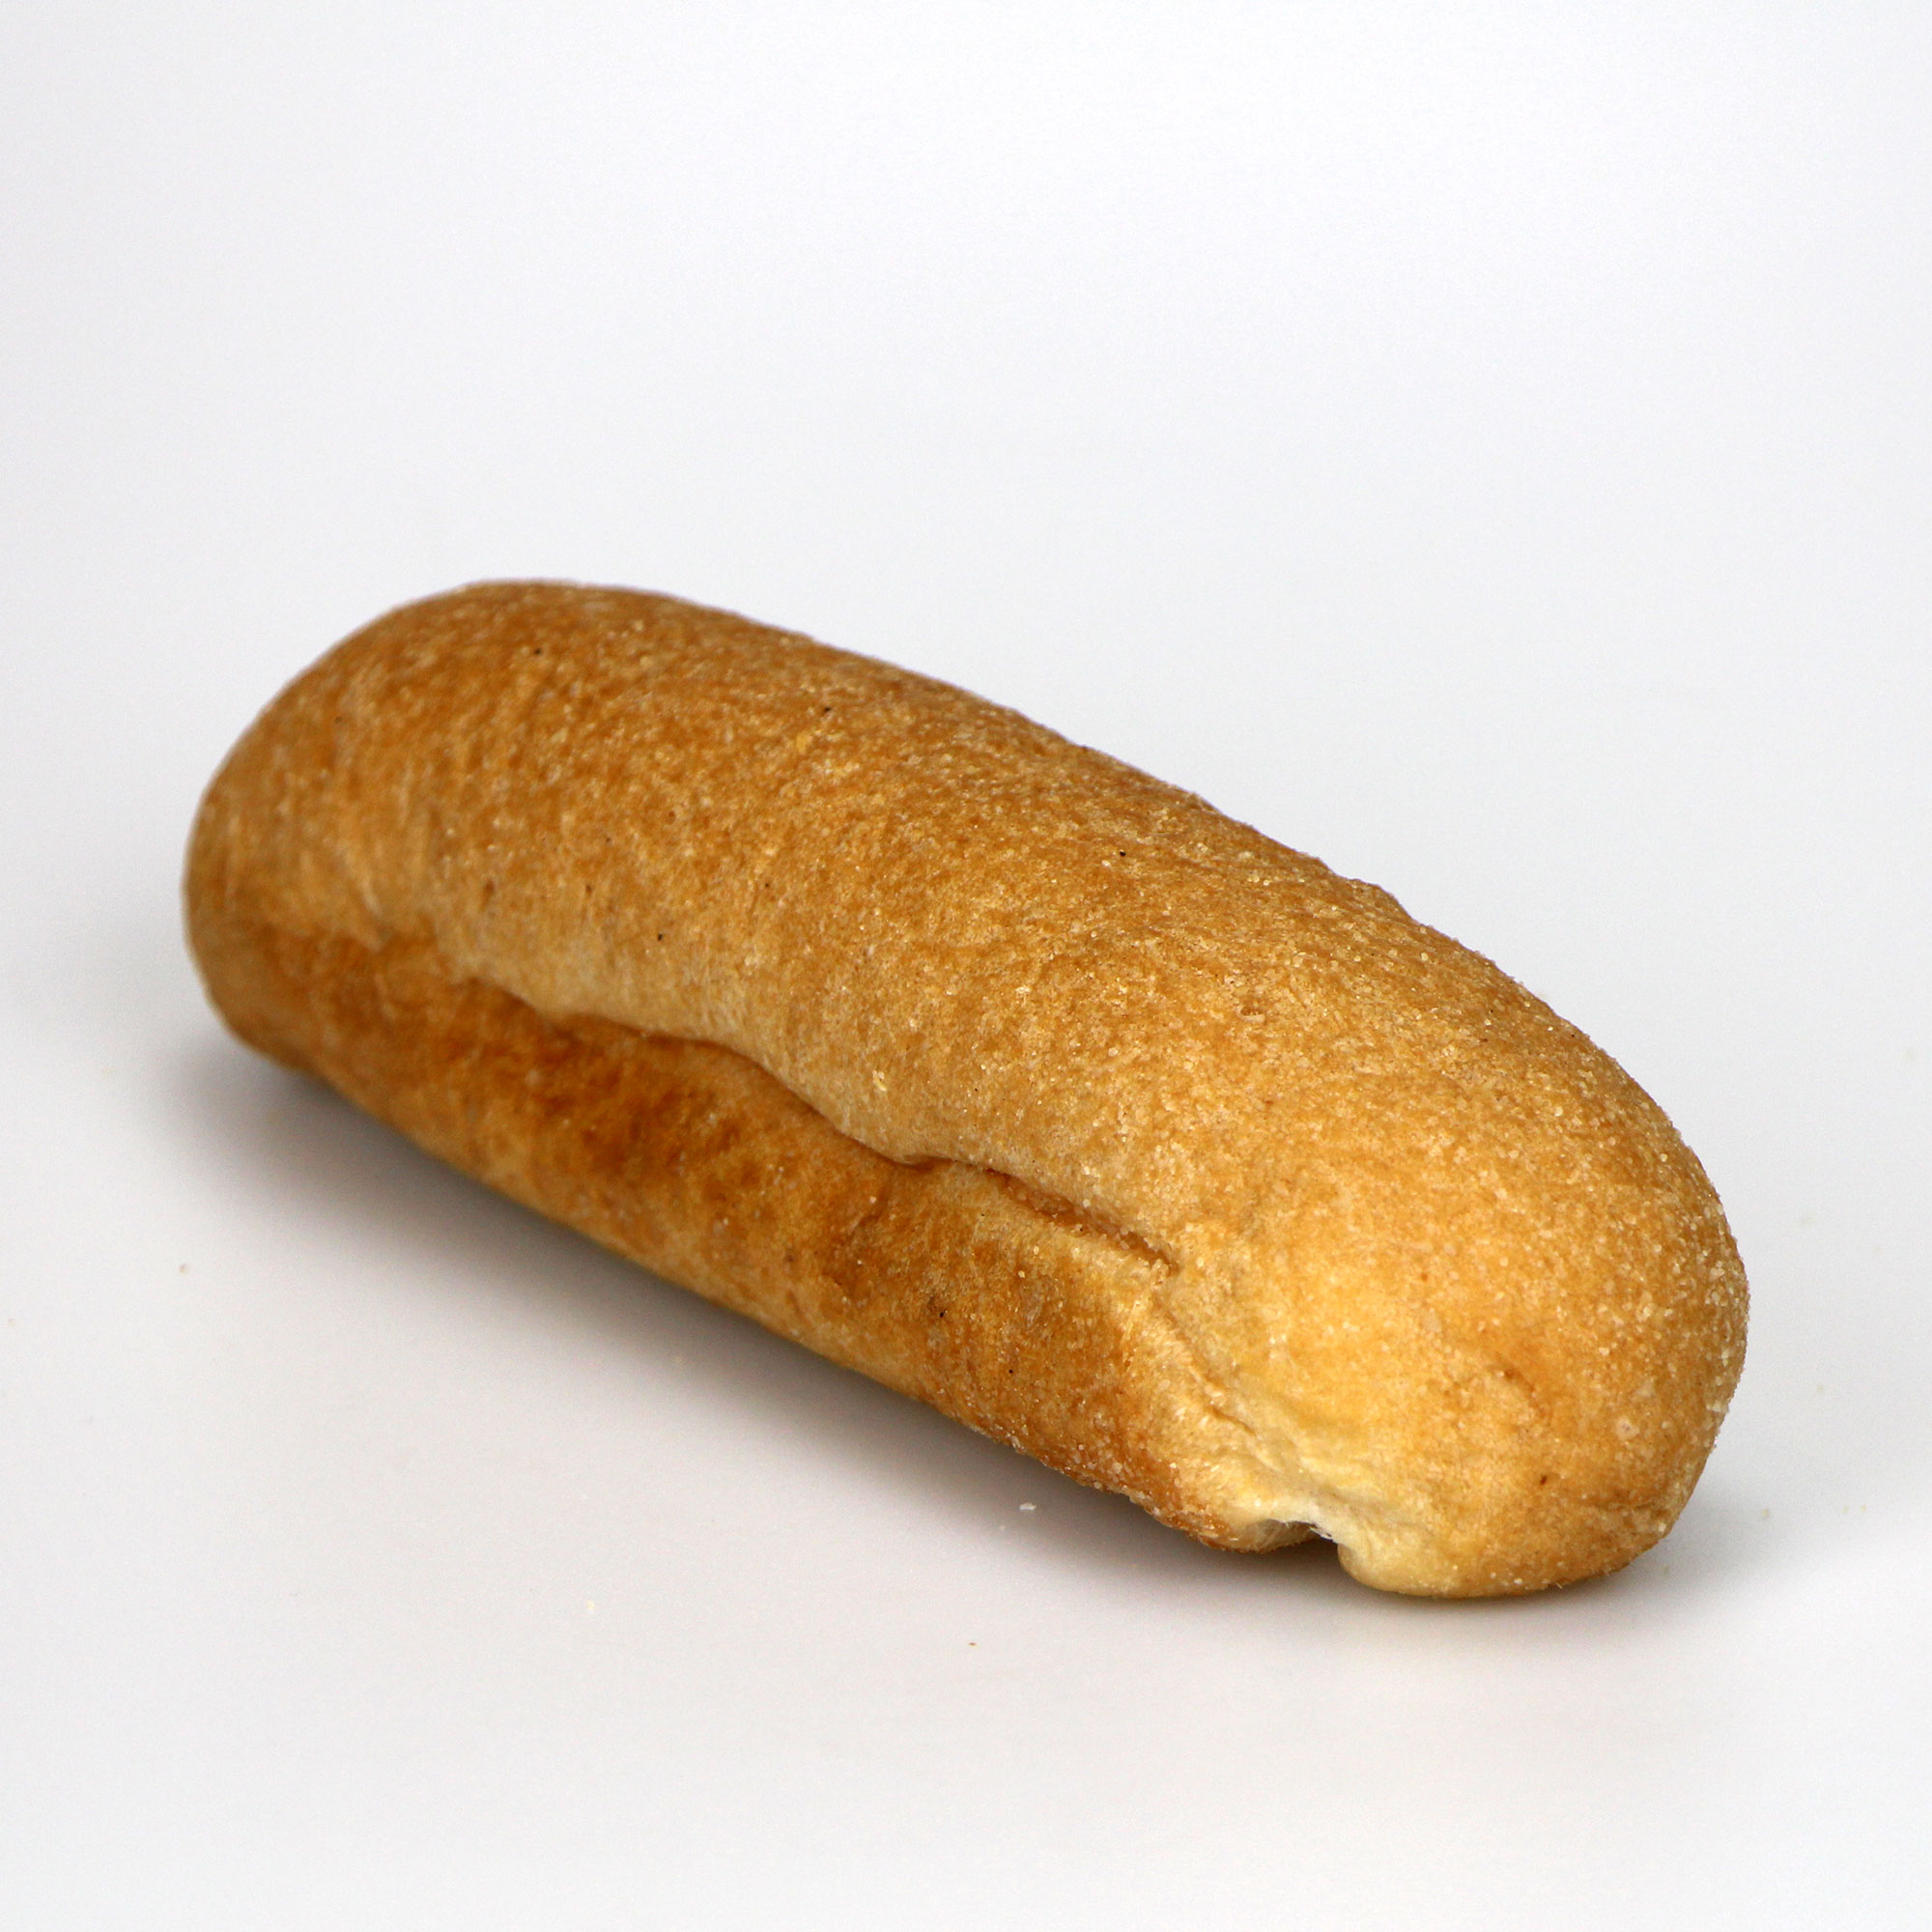 Baguette SINGLE - The Healthy Loaf